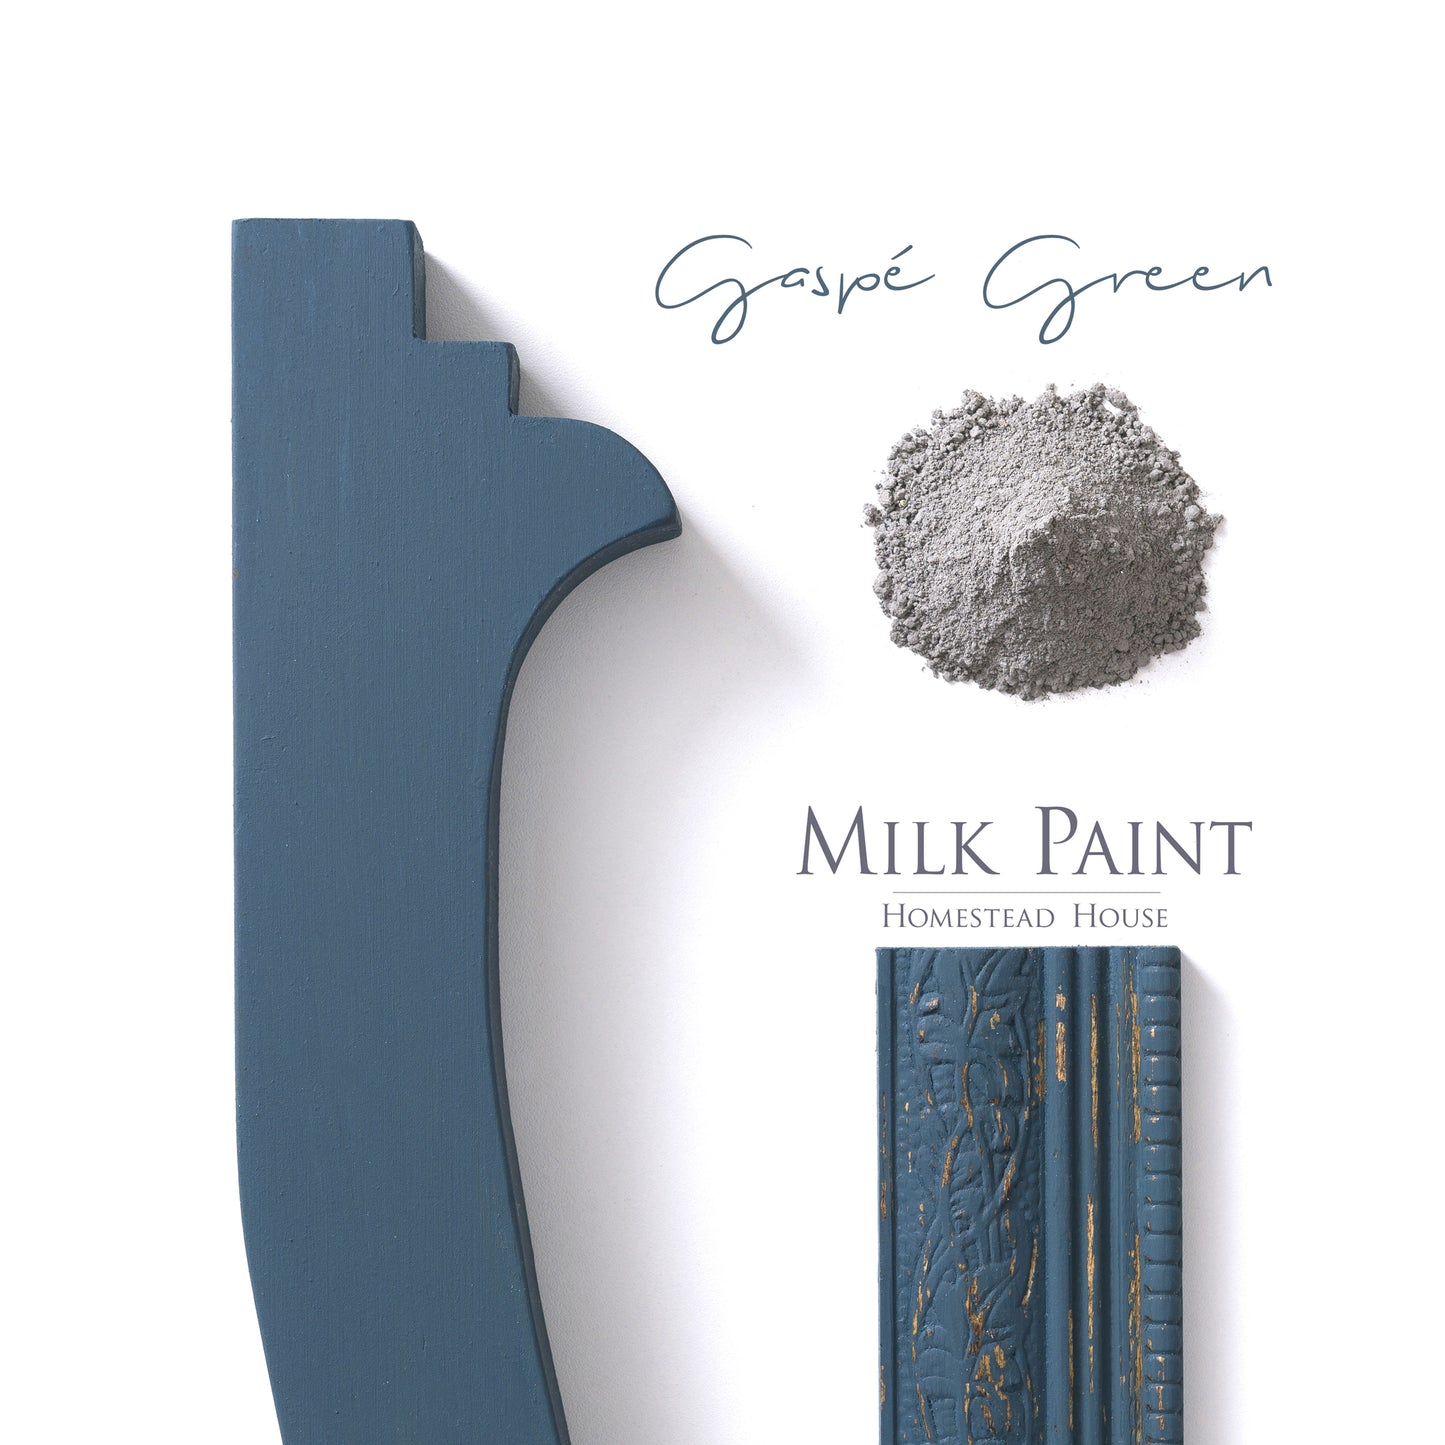 Milk Paint by Homestead House in Gaspé Green- - a dark green with a blue tone and a hint of grey.  | homesteadhouse.ca